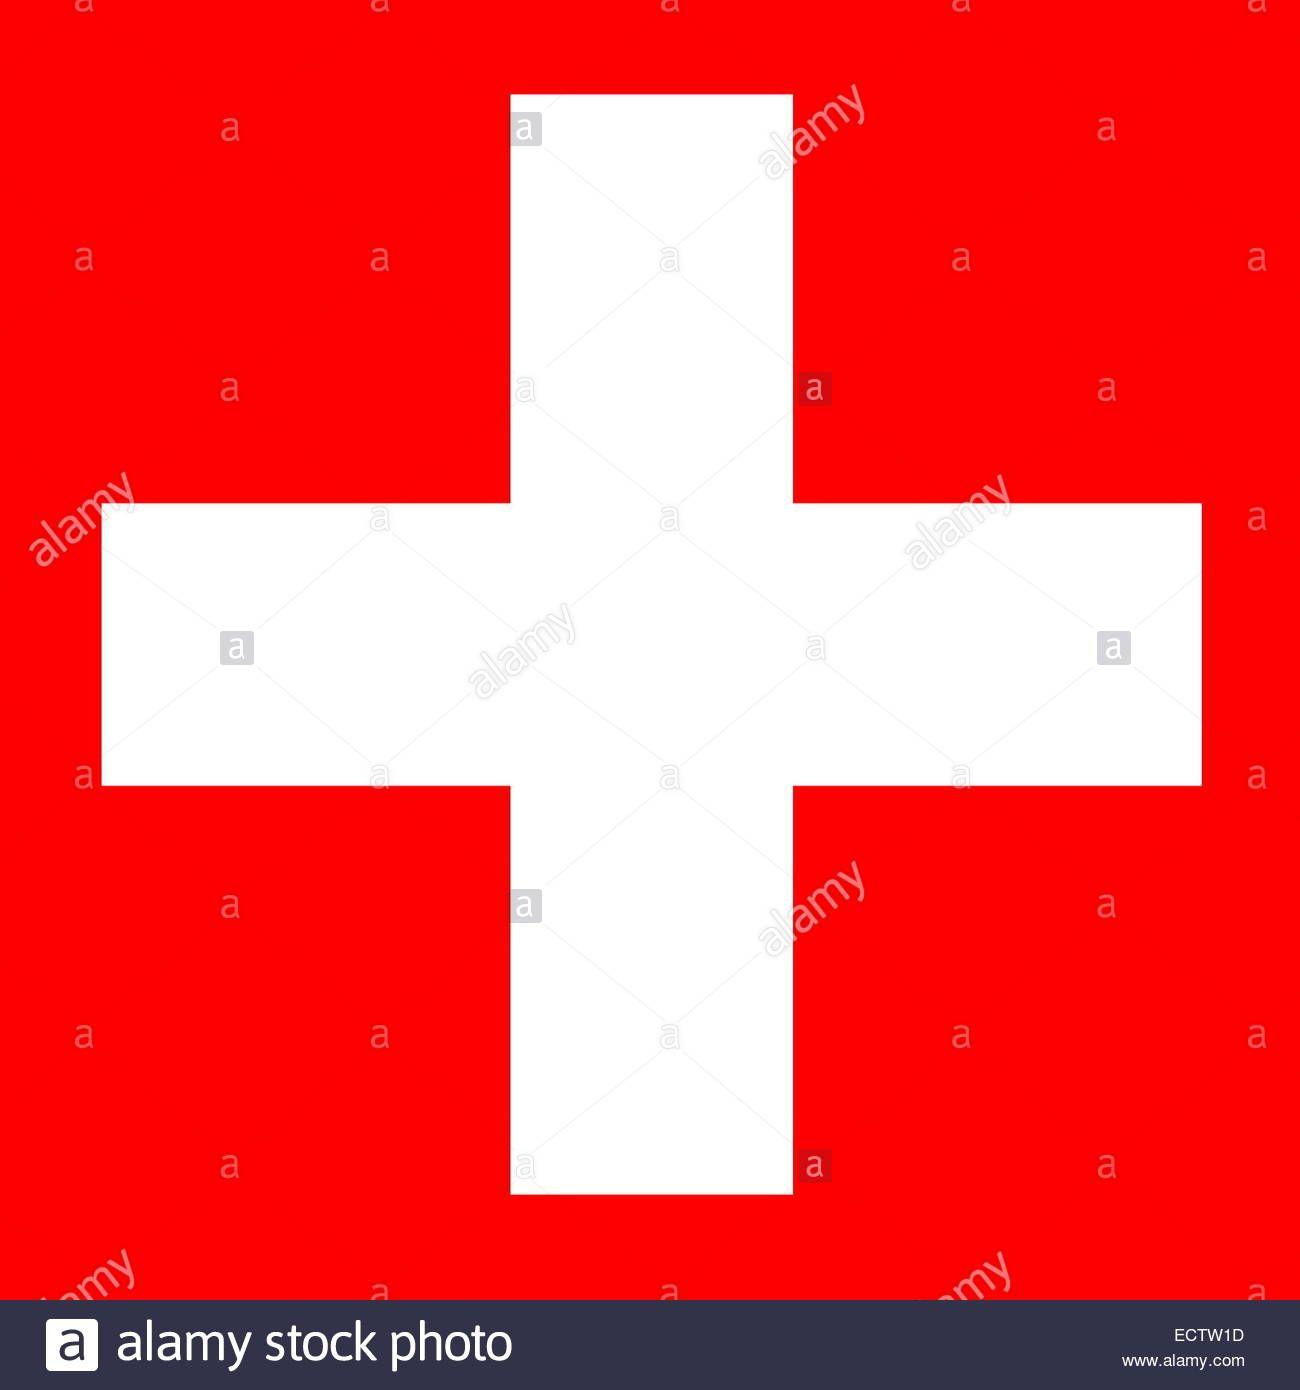 What Goes with Red and White Square Company Logo - Red square white cross Logos